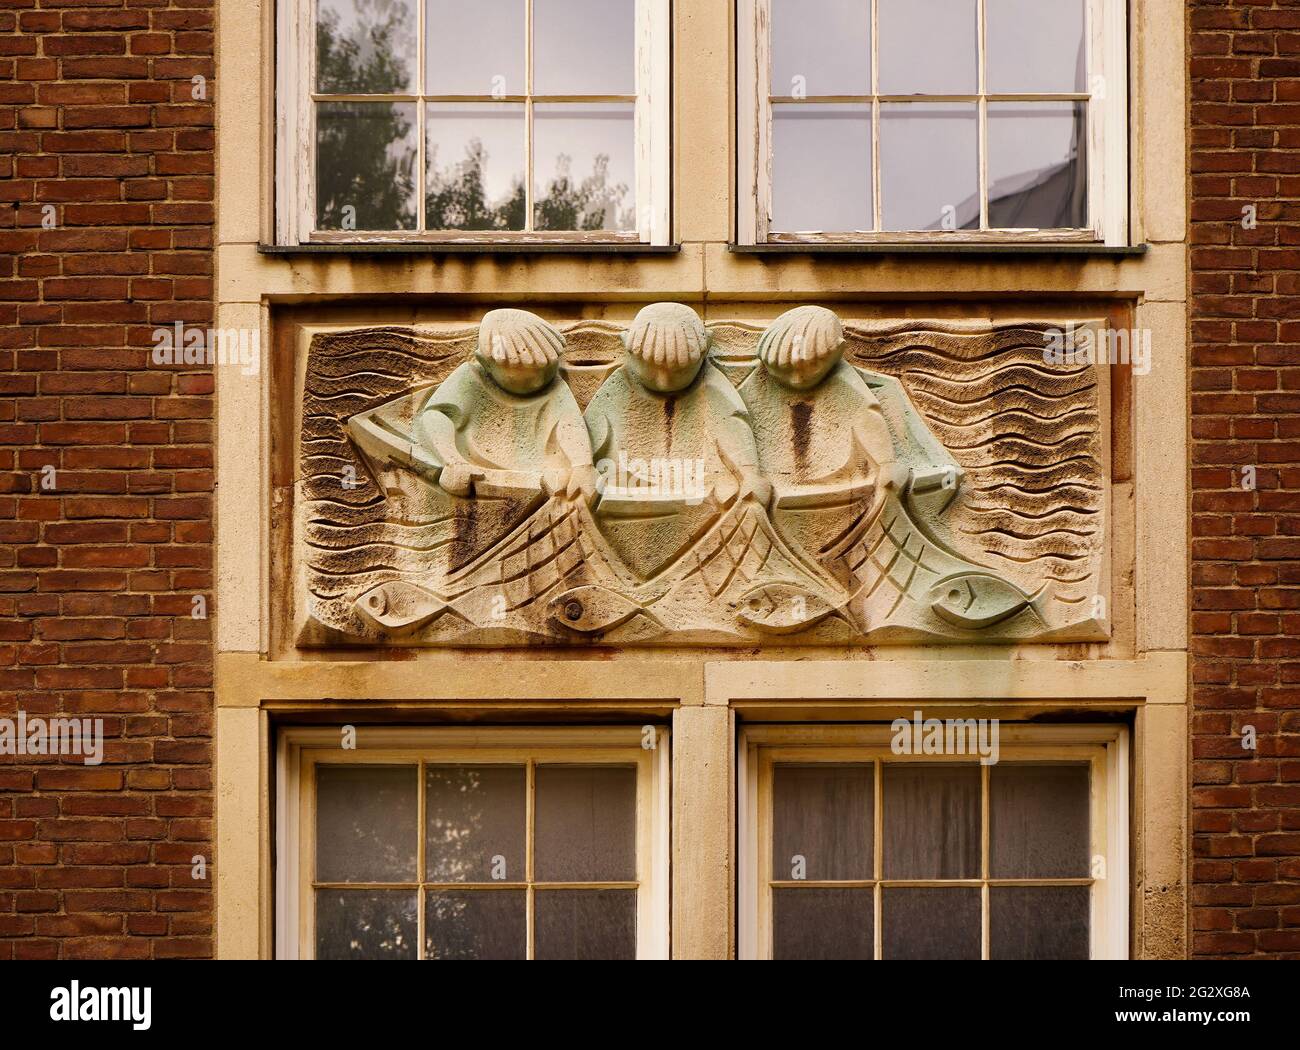 Decoration depicting fisherman on an old building in the historic old town in Düsseldorf, Germany. Stock Photo